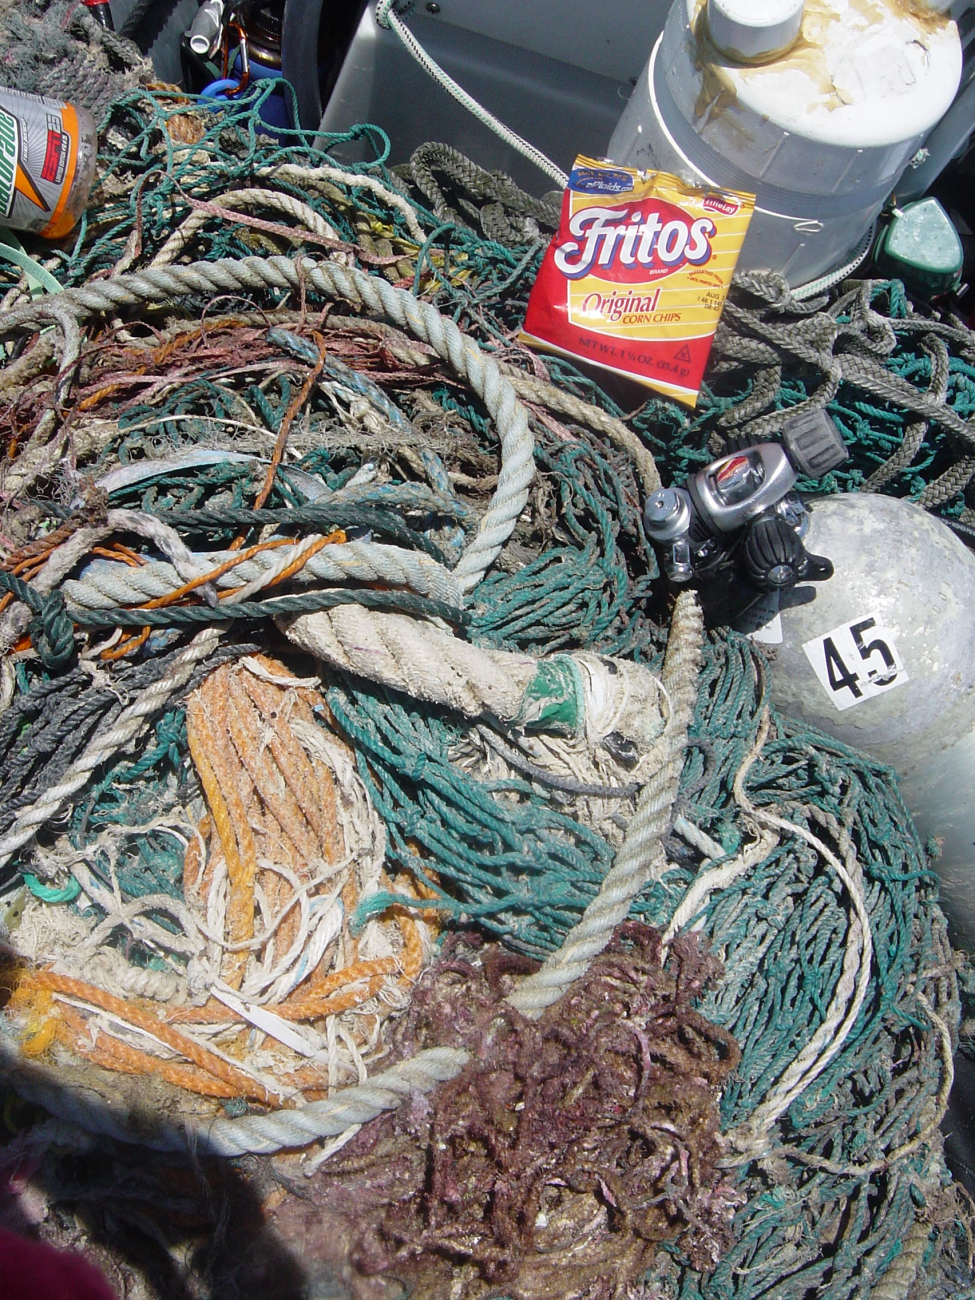 Scuba gear, remains of lunch, and derelict net on small craft prior to return to ship